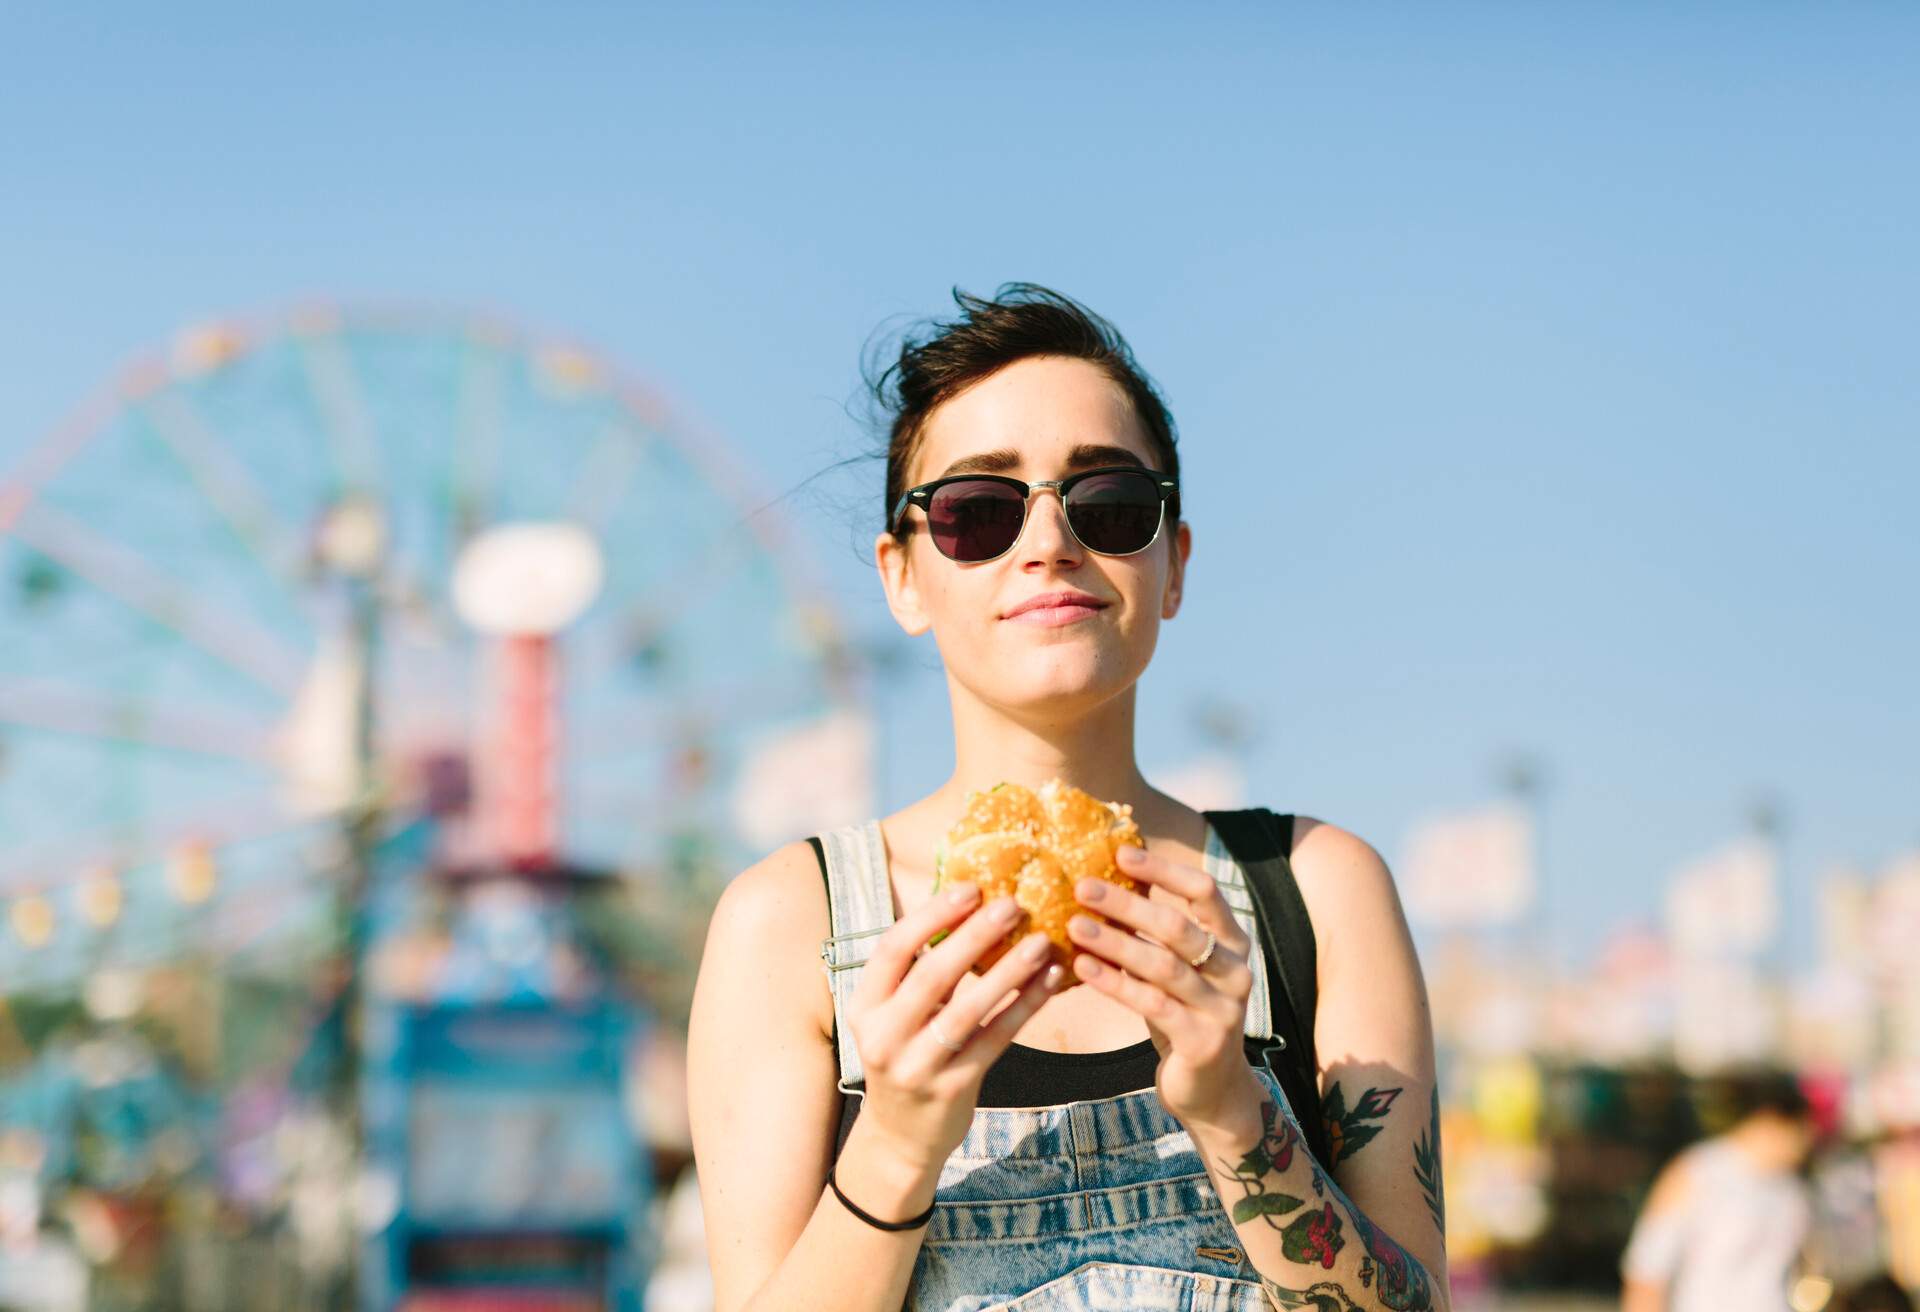 A tattooed young woman standing in an amusement park holding a sandwich with a big Ferris wheel behind her.